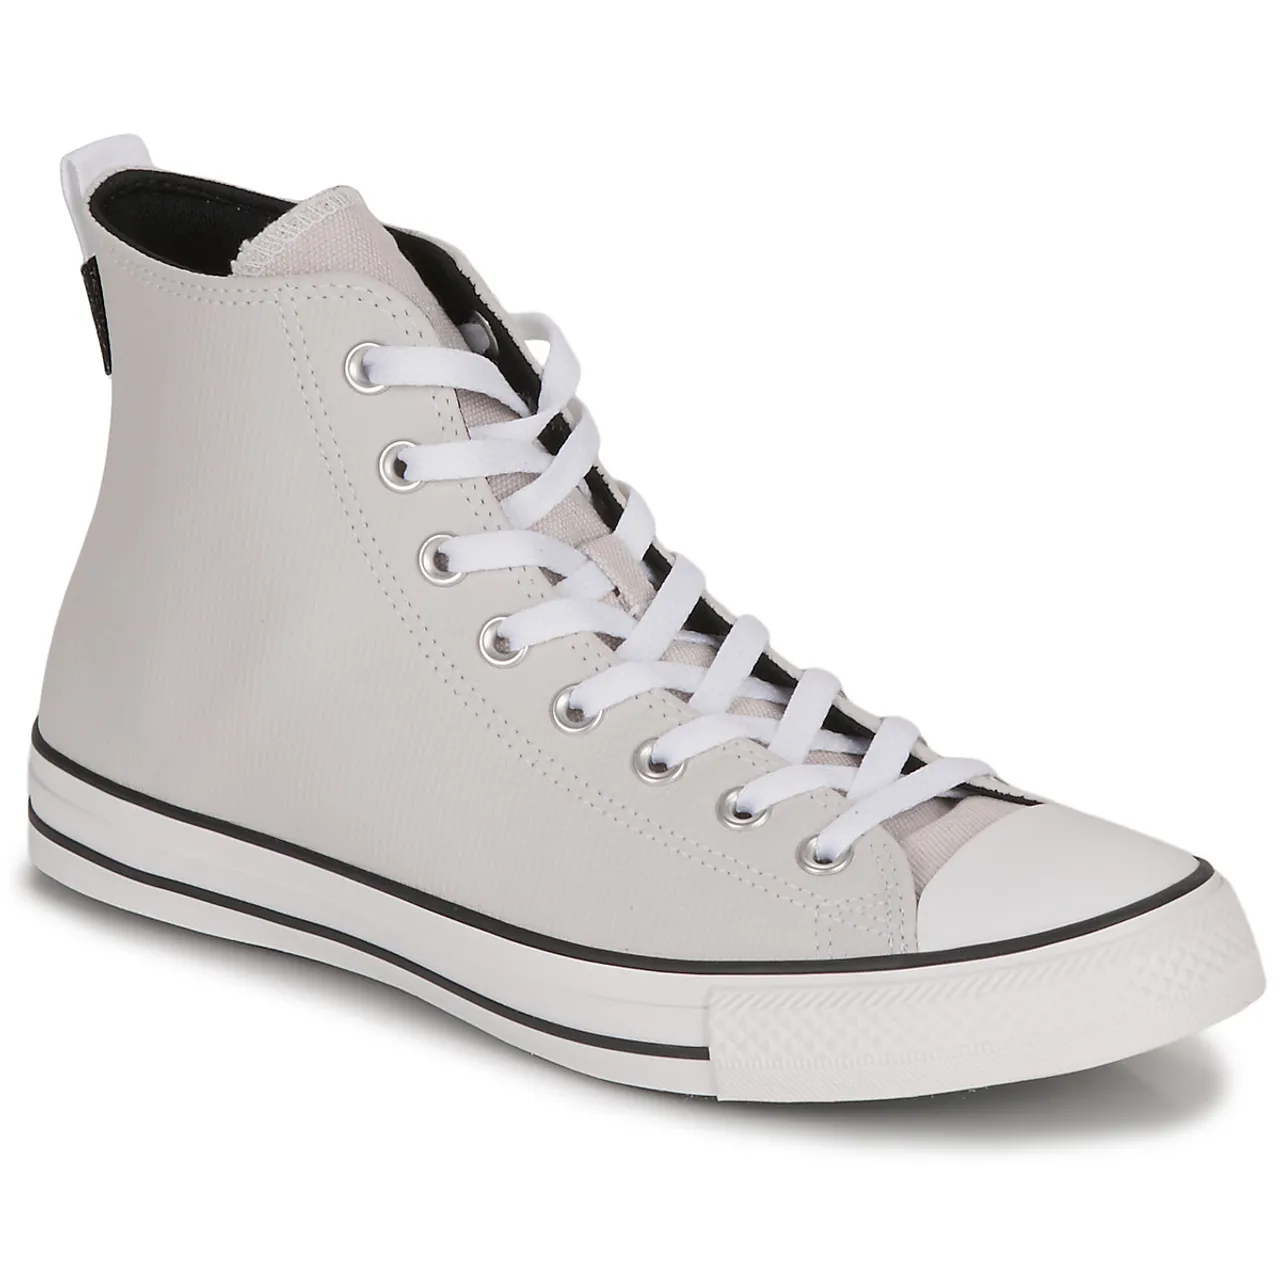 Converse  CHUCK TAYLOR ALL STAR TECTUFF  men's Shoes (High-top Trainers) in Grey